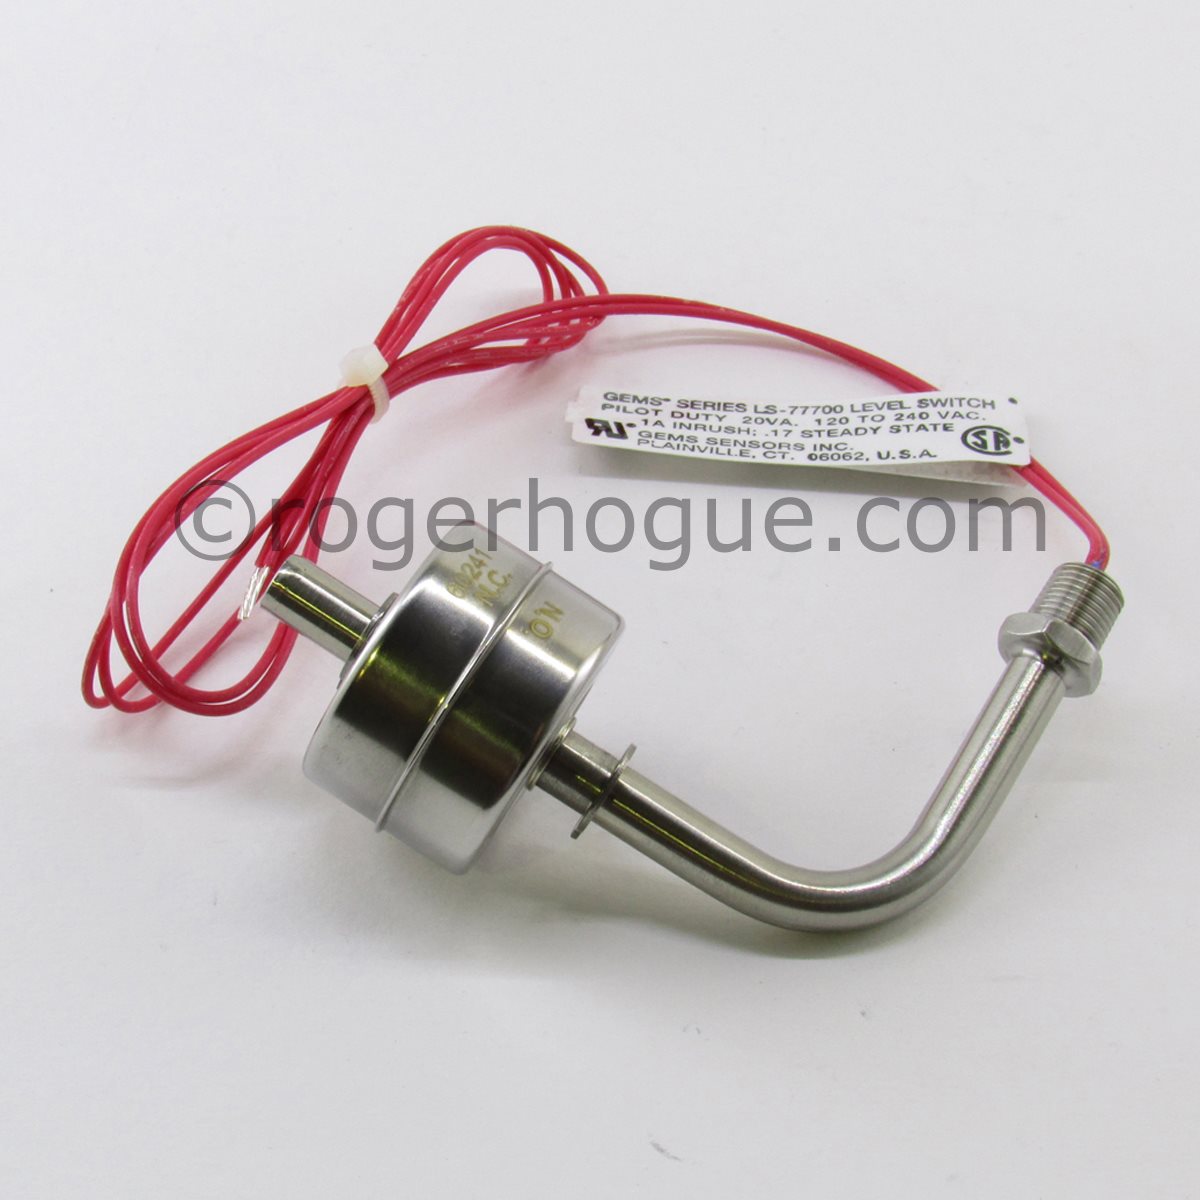 FLOAT SWITCH STAINLESS SÉRIE LS-77700